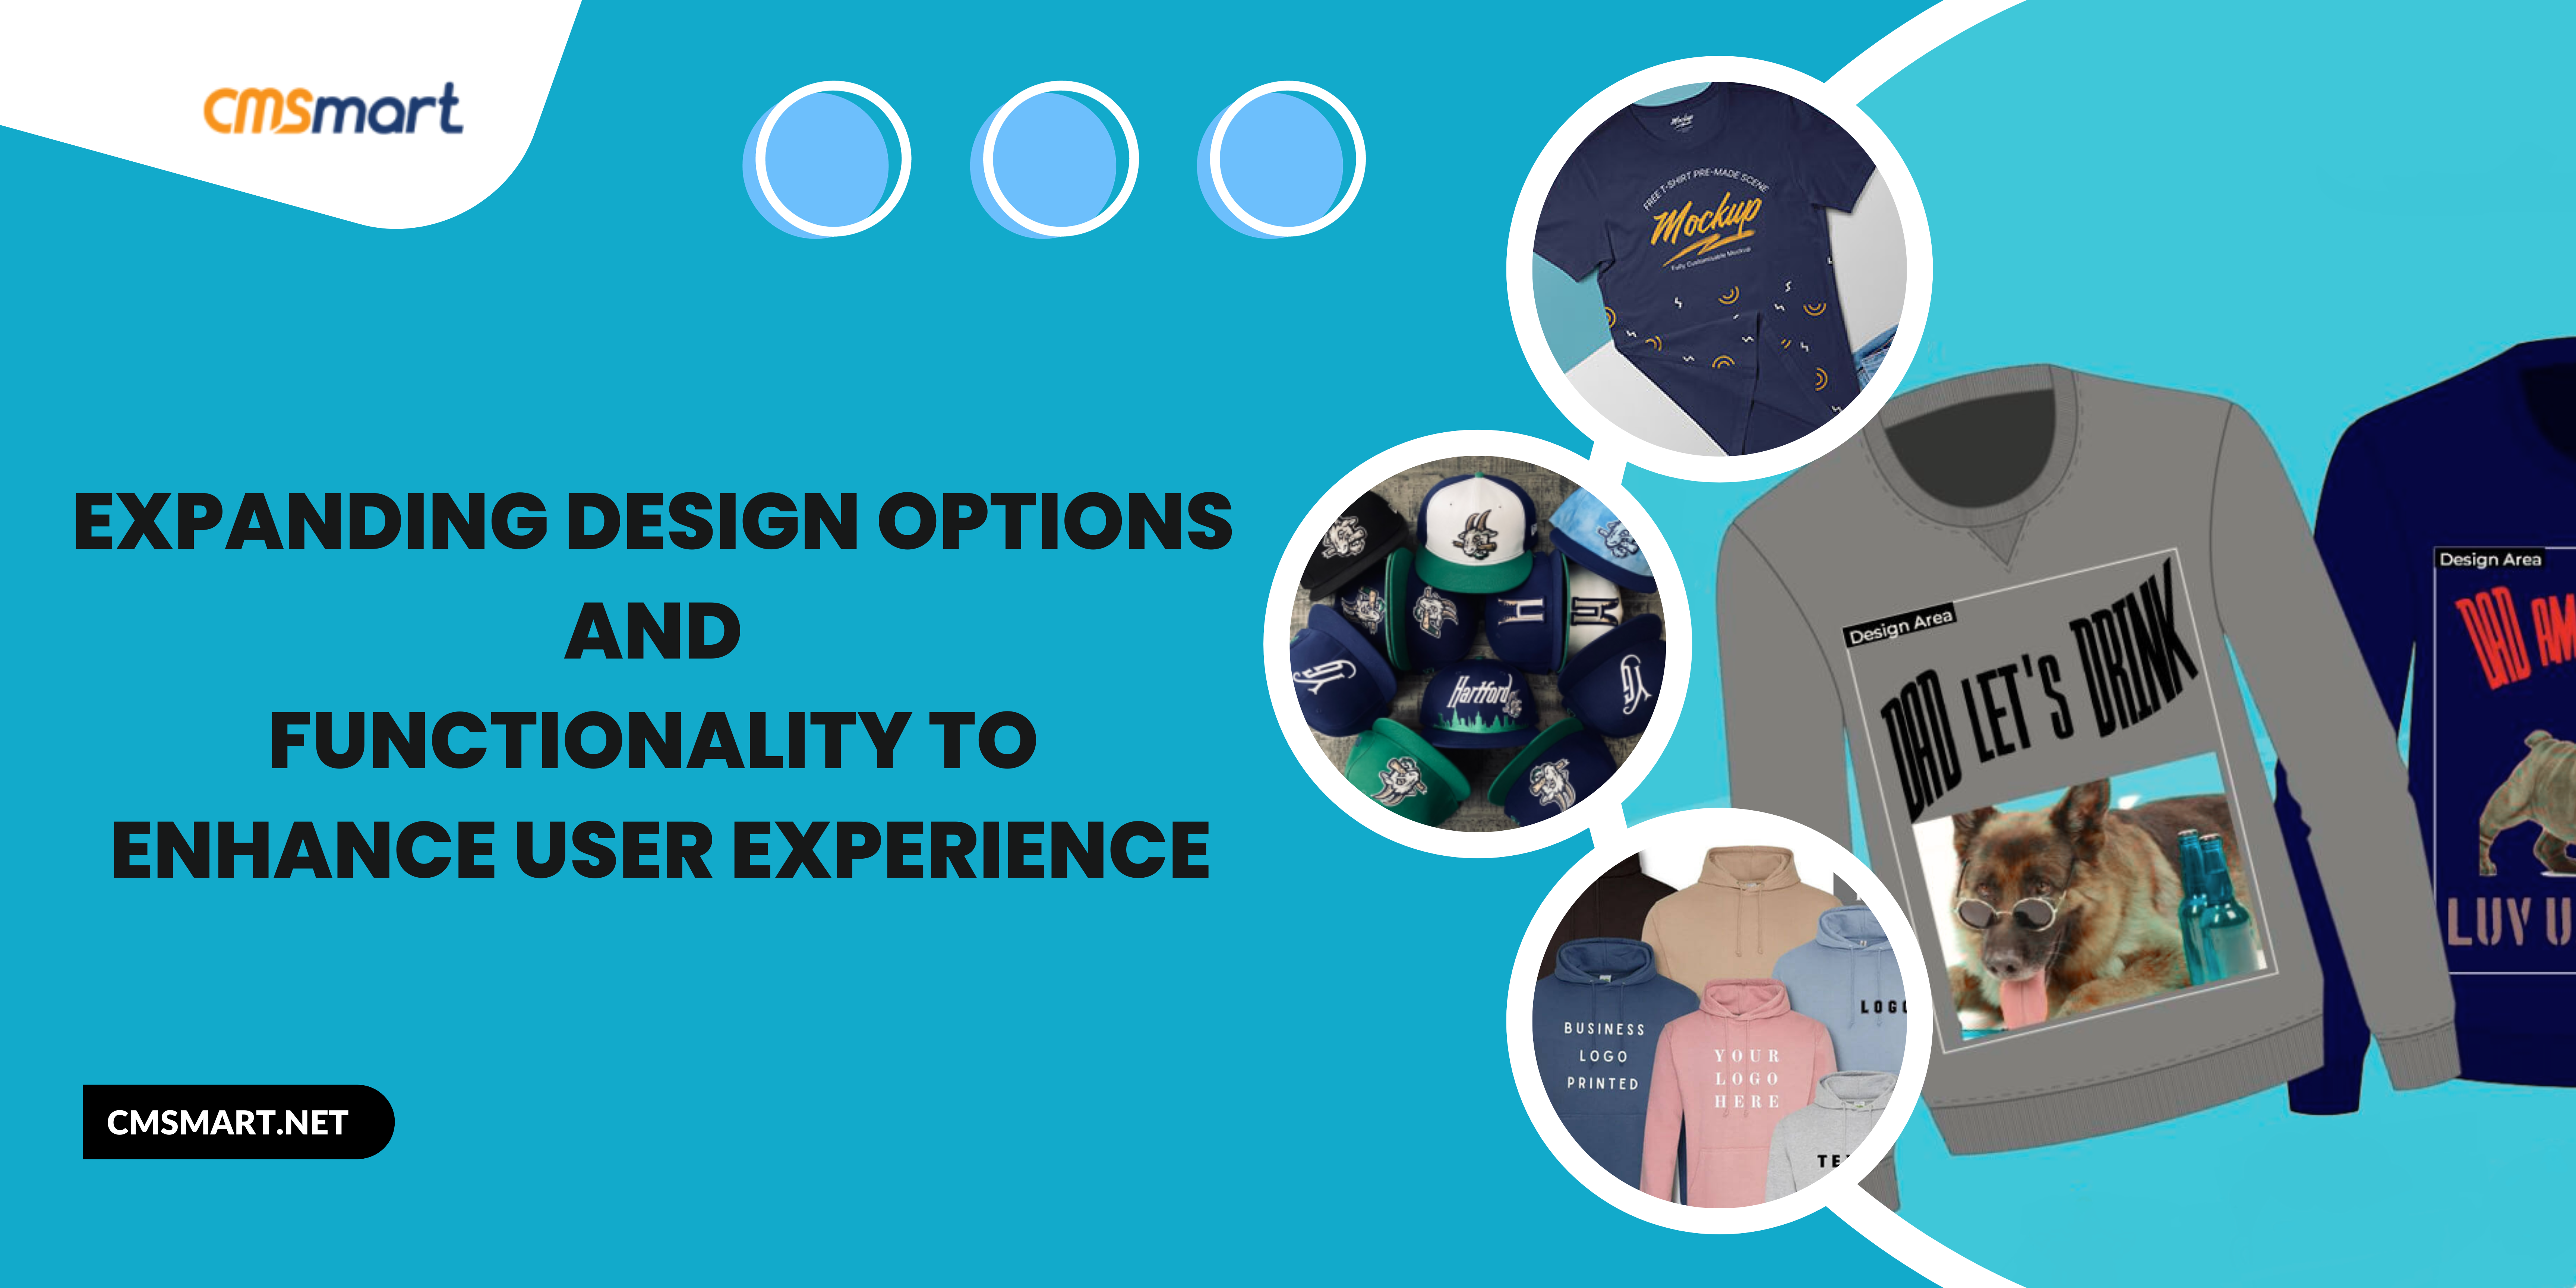 Expanding Design Options and Functionality to Enhance User Experience